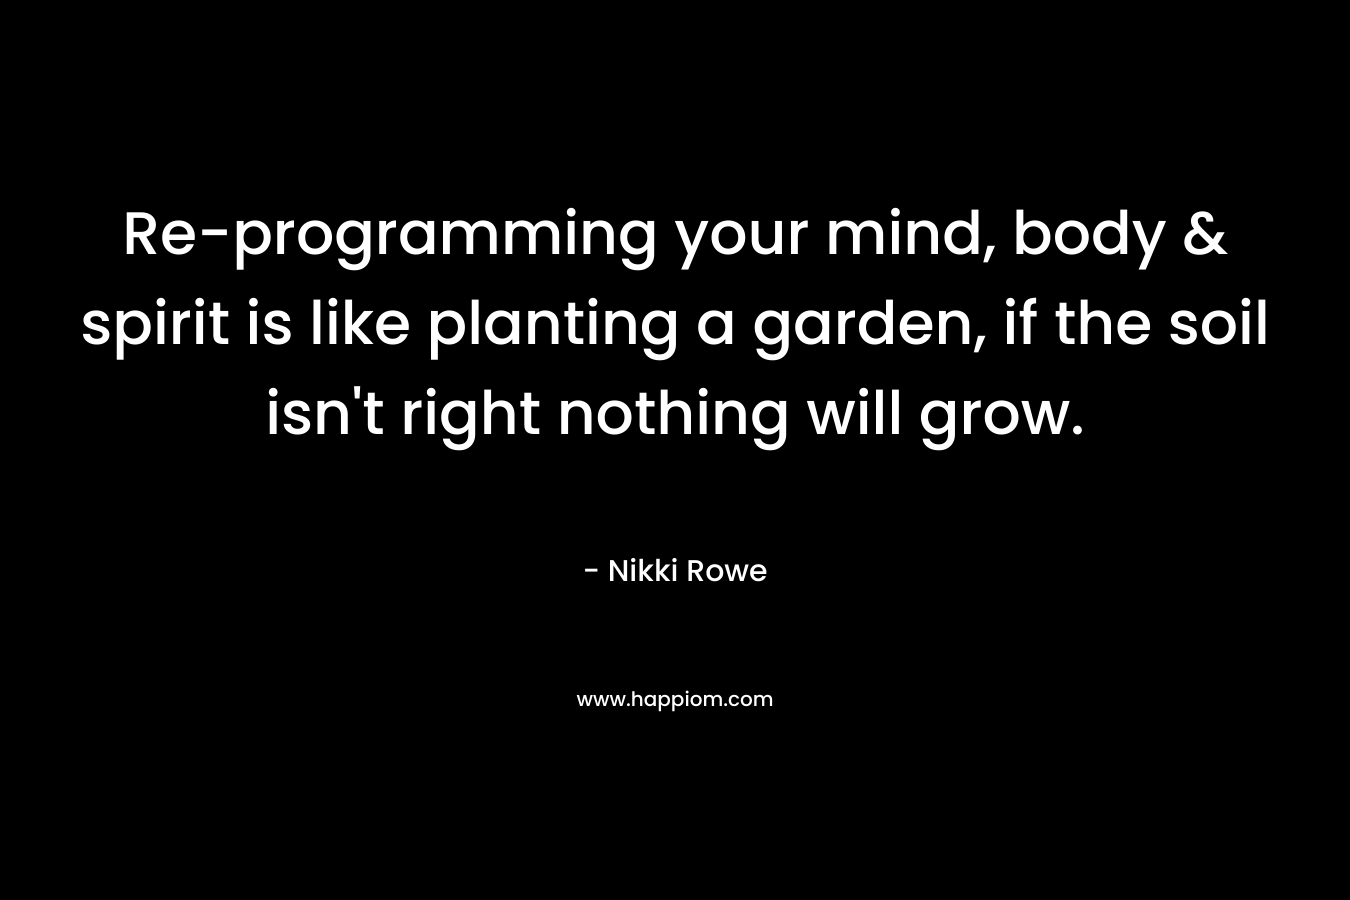 Re-programming your mind, body & spirit is like planting a garden, if the soil isn’t right nothing will grow. – Nikki Rowe